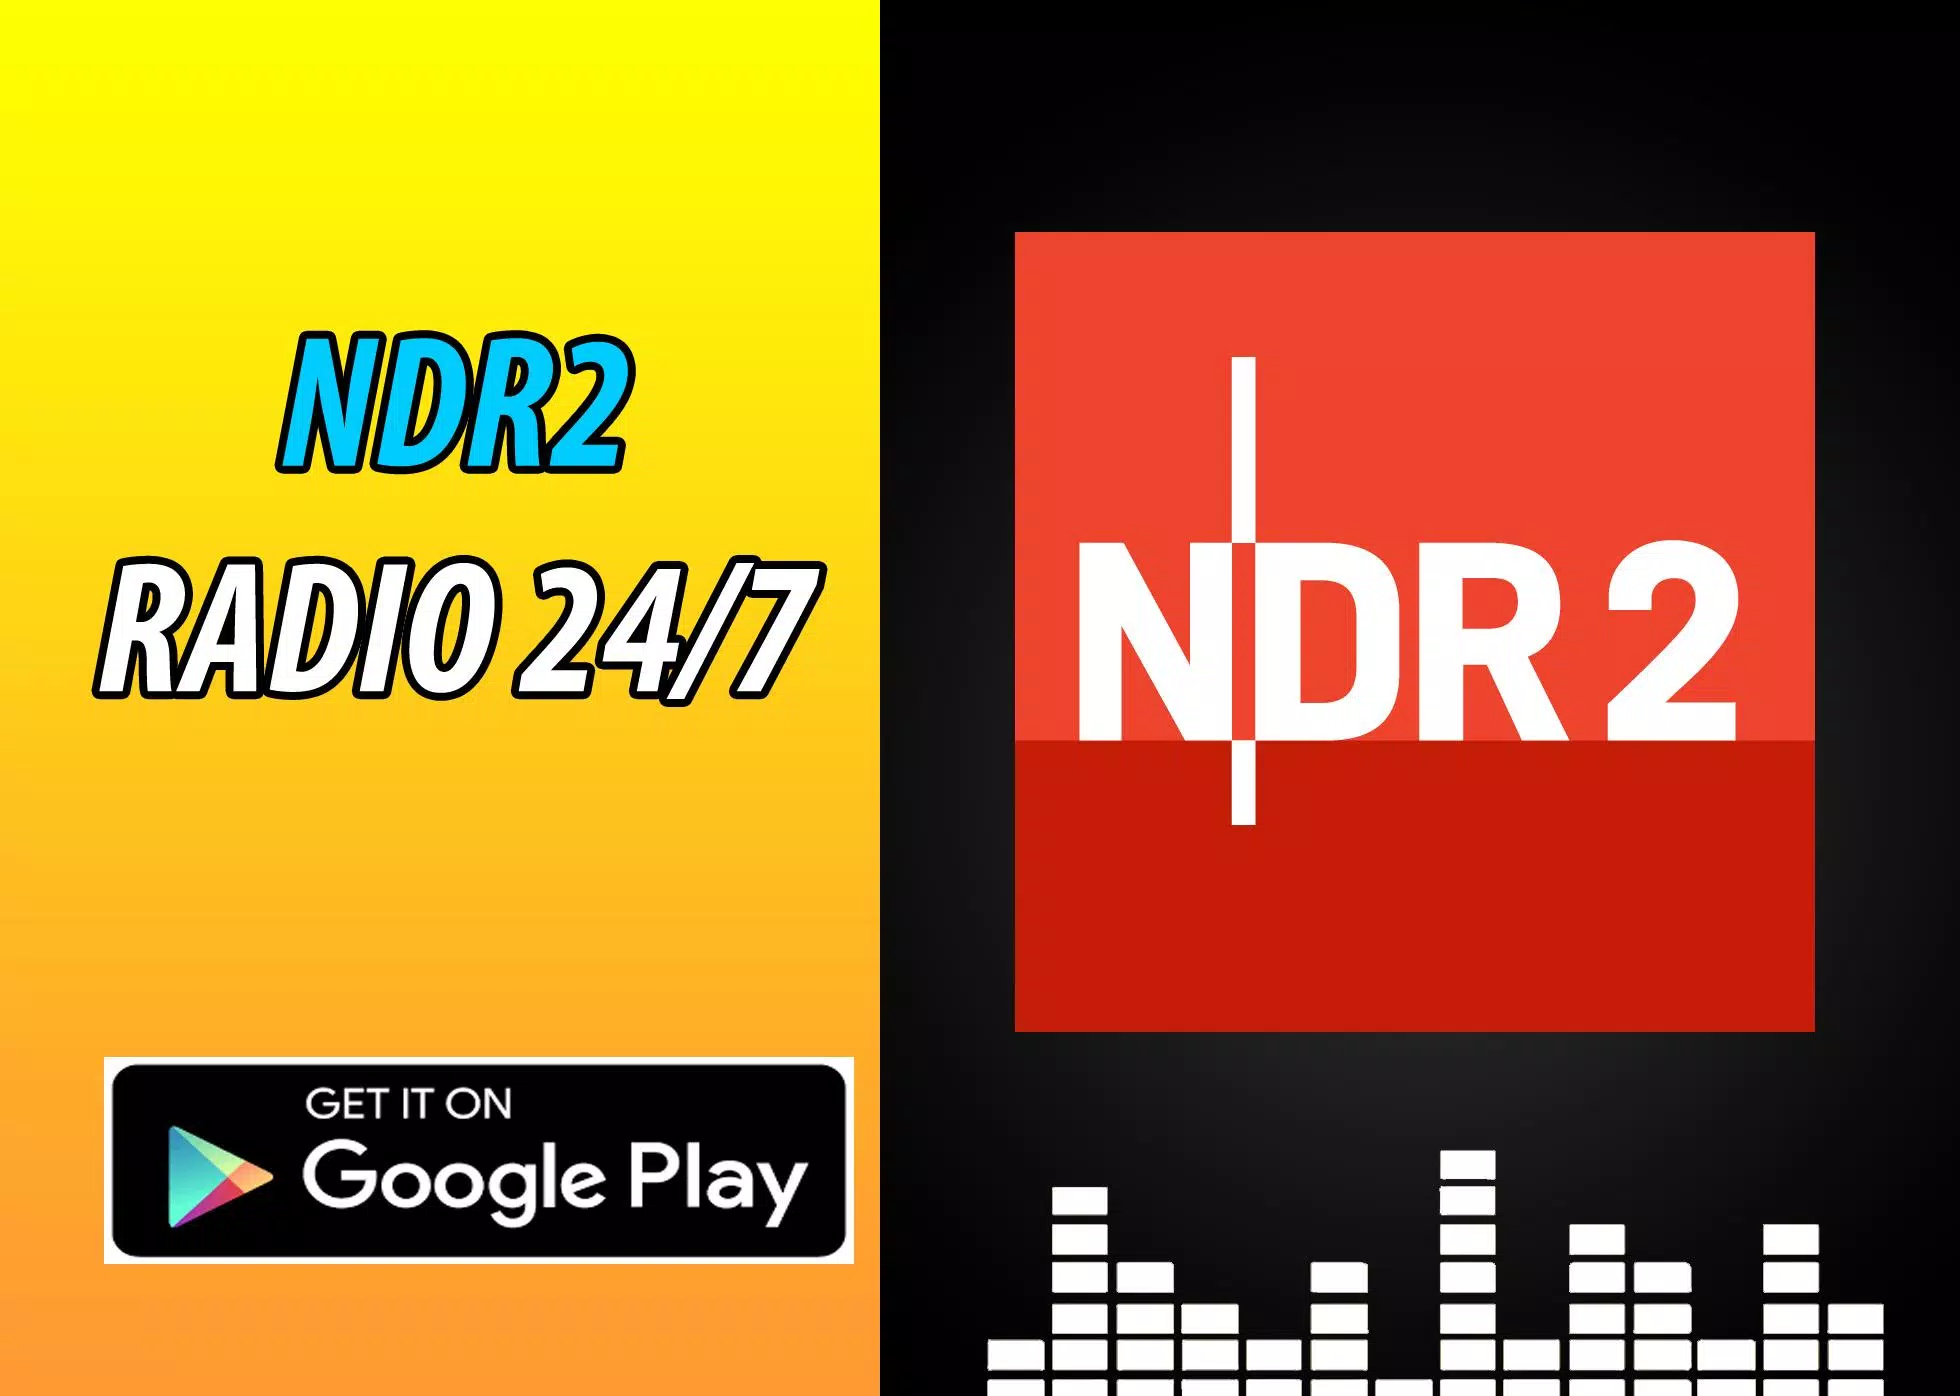 NDR 2 Radio Live 24/7 for Android - APK Download